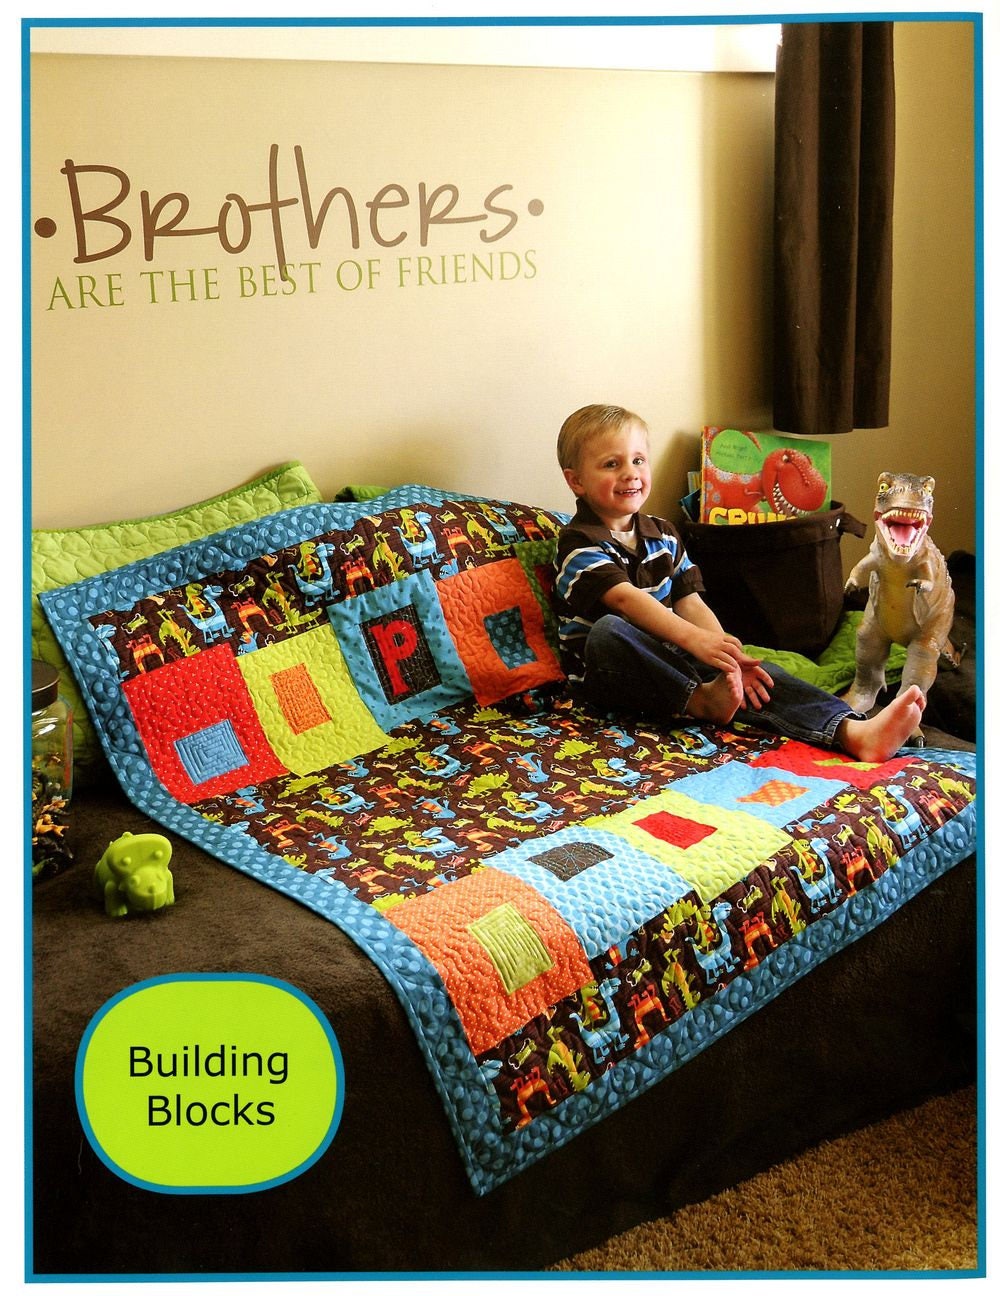 Little Quilts 4 Little Kids Quilt Pattern Book by Heather Peterson of Anka's Treasures